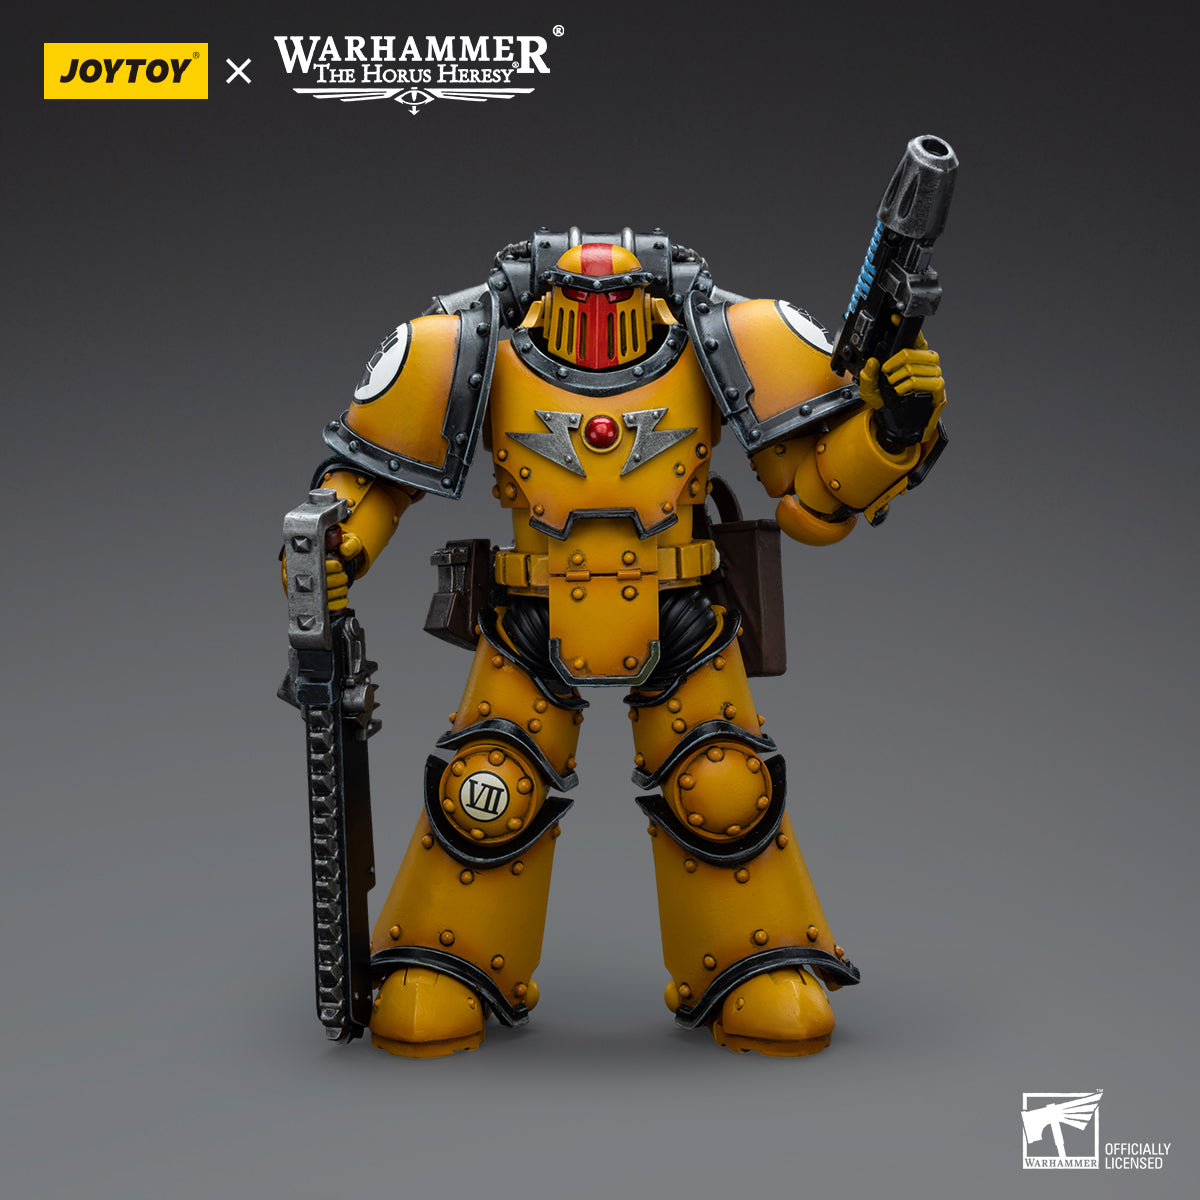 Warhammer Collectibles: 1/18 Scale Imperial Fists Legion MkIII Despoiler Squad Sgt with Pistol